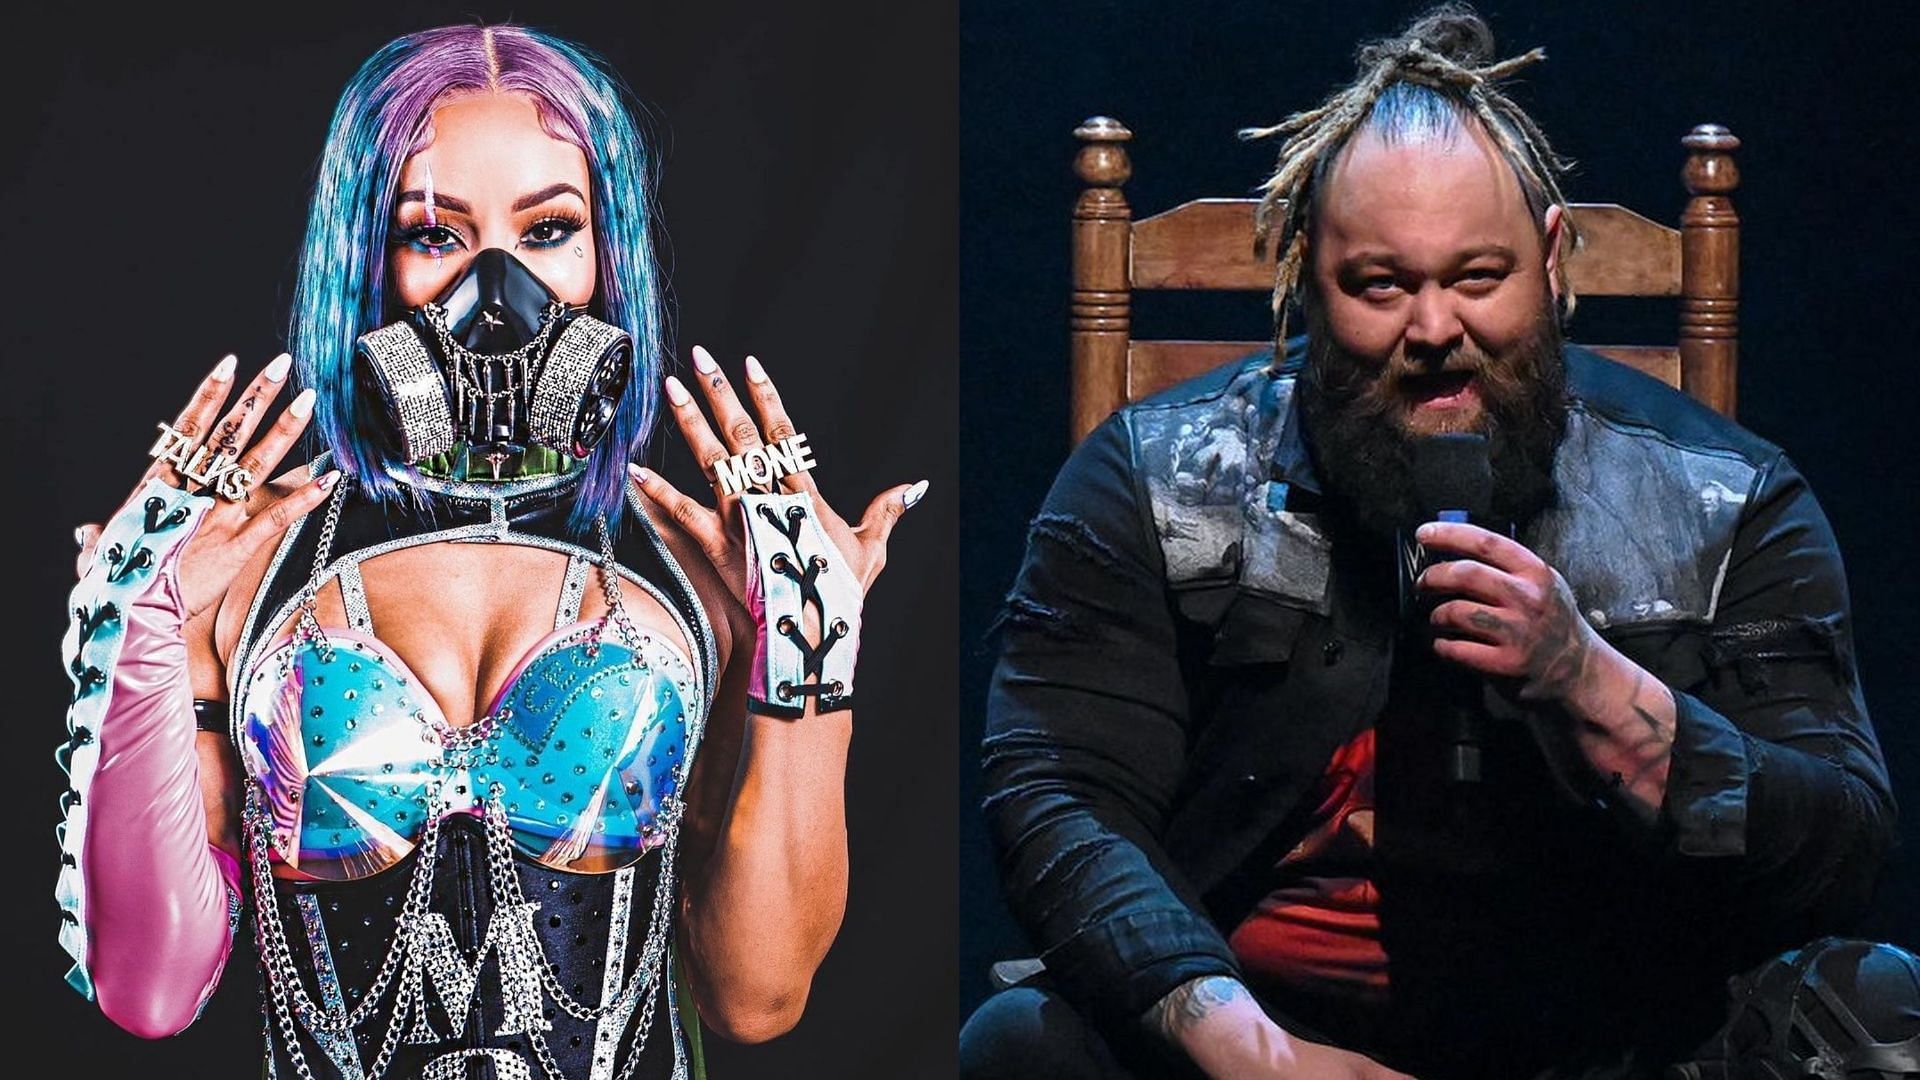 Mercedes Money and the late, great Bray Wyatt